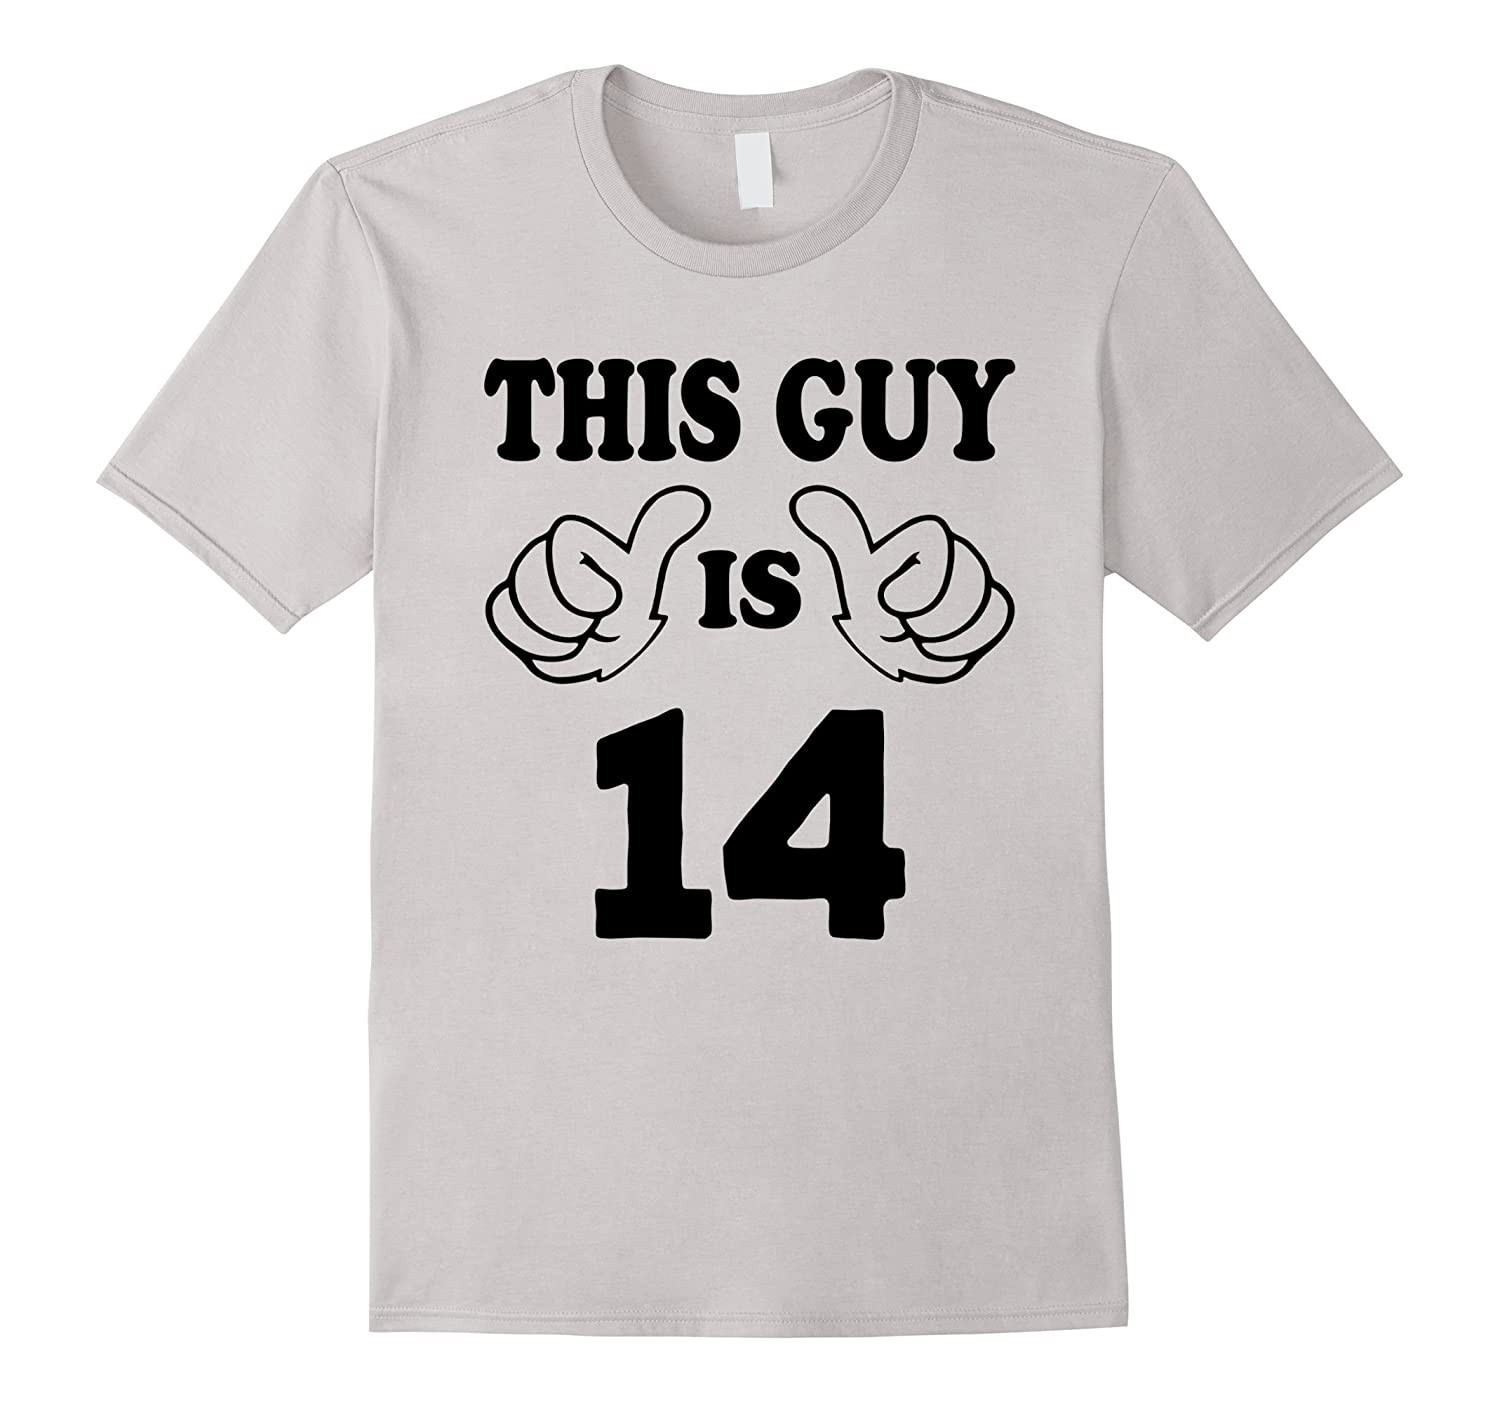 14Th Birthday Gift Ideas
 This Guy is fourteen 14 Years Old 14th Birthday Gift Ideas